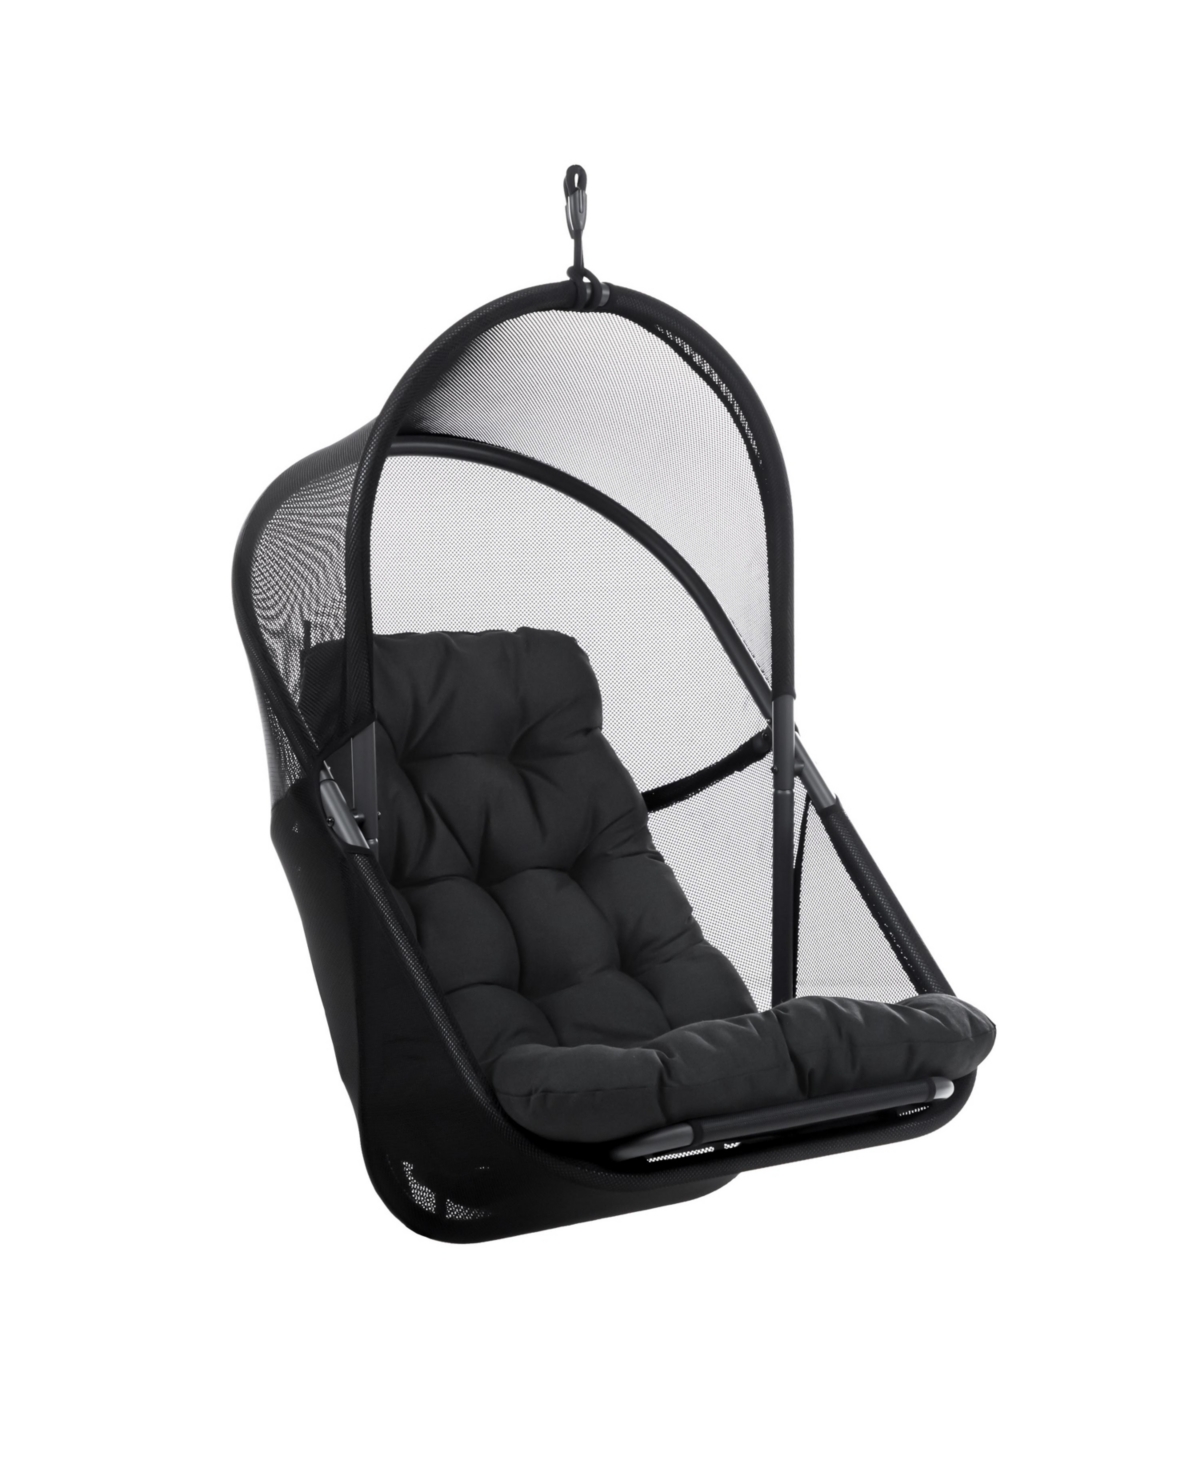 Furniture Of America 46" Mesh Foldable Swing Chair With Canopy High Back Cushion No Stand In Black